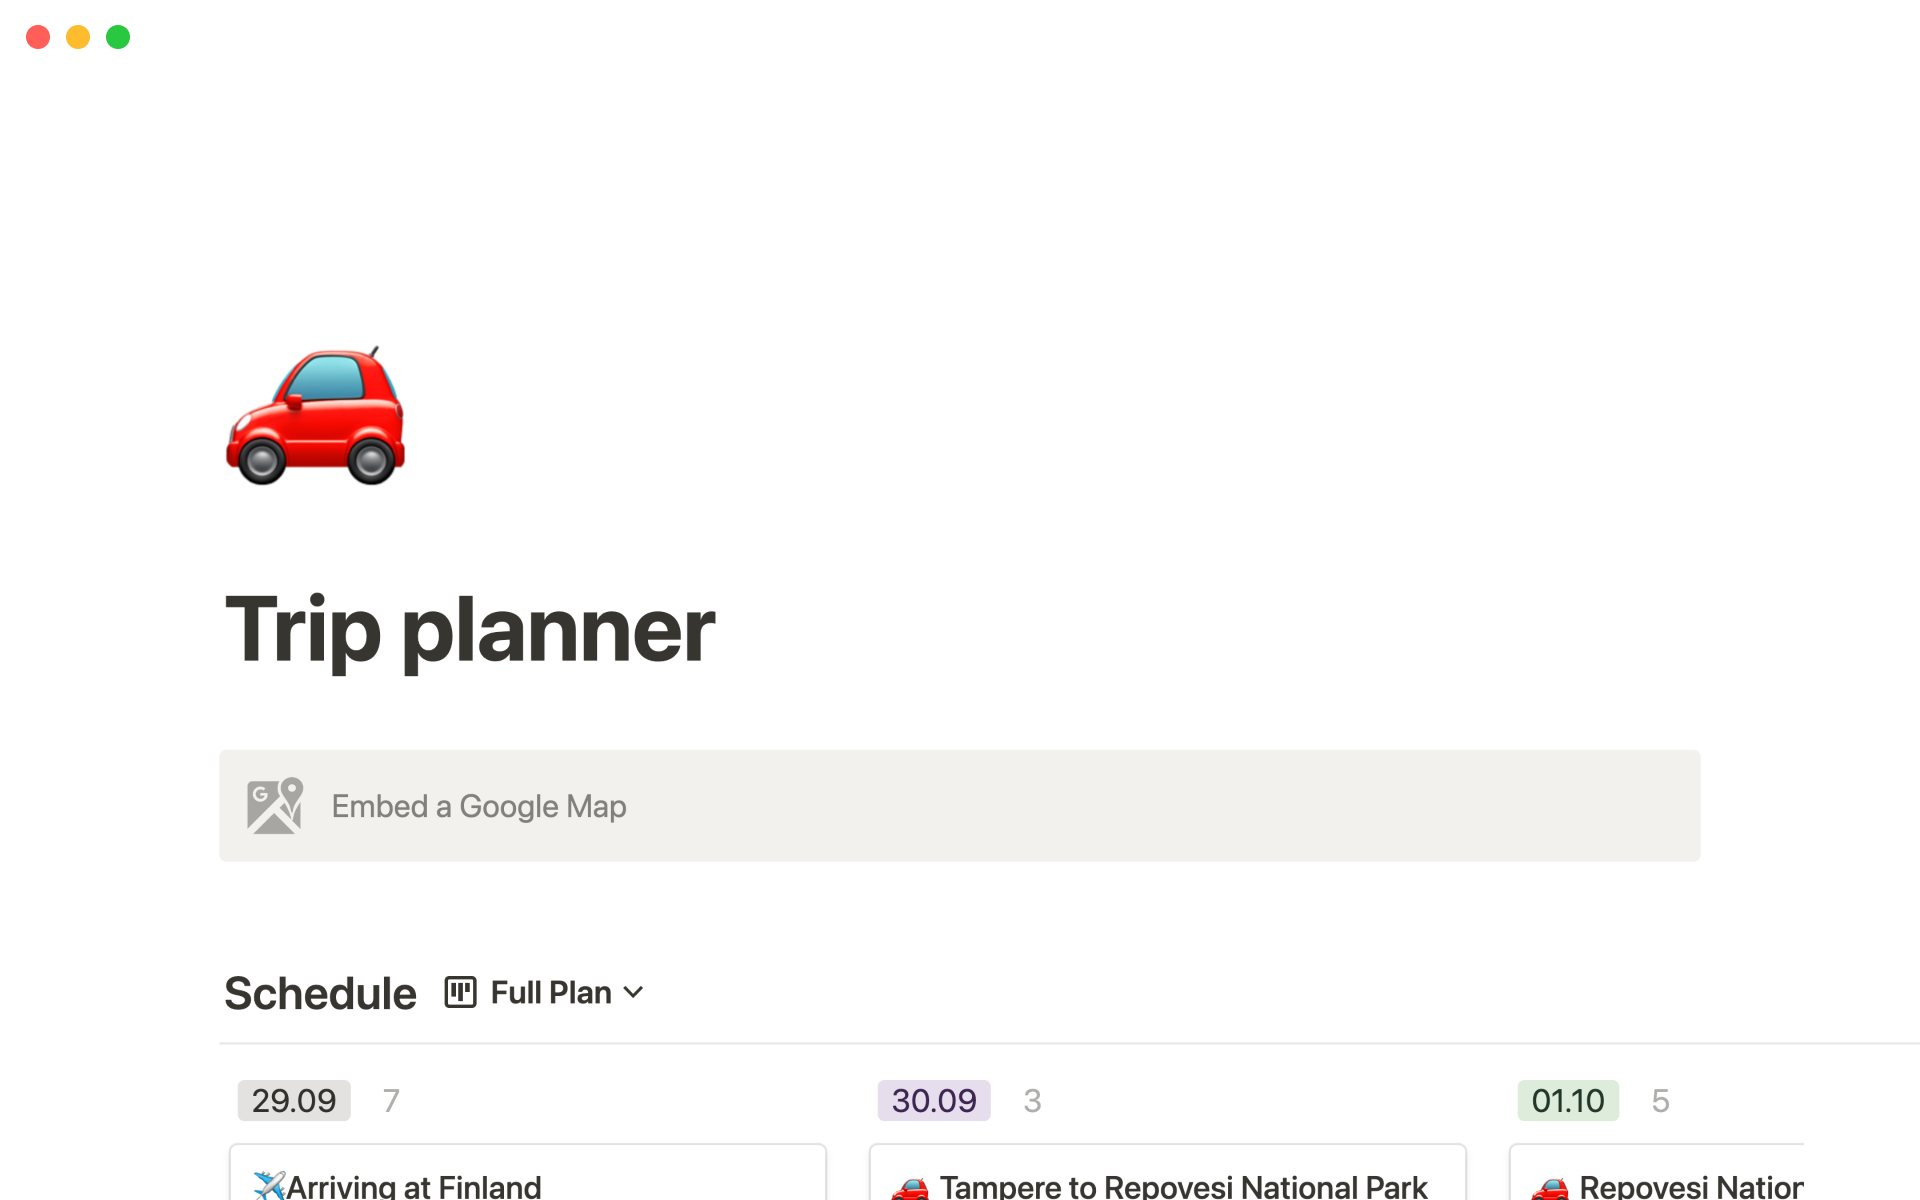 The desktop image for the Trip planner template